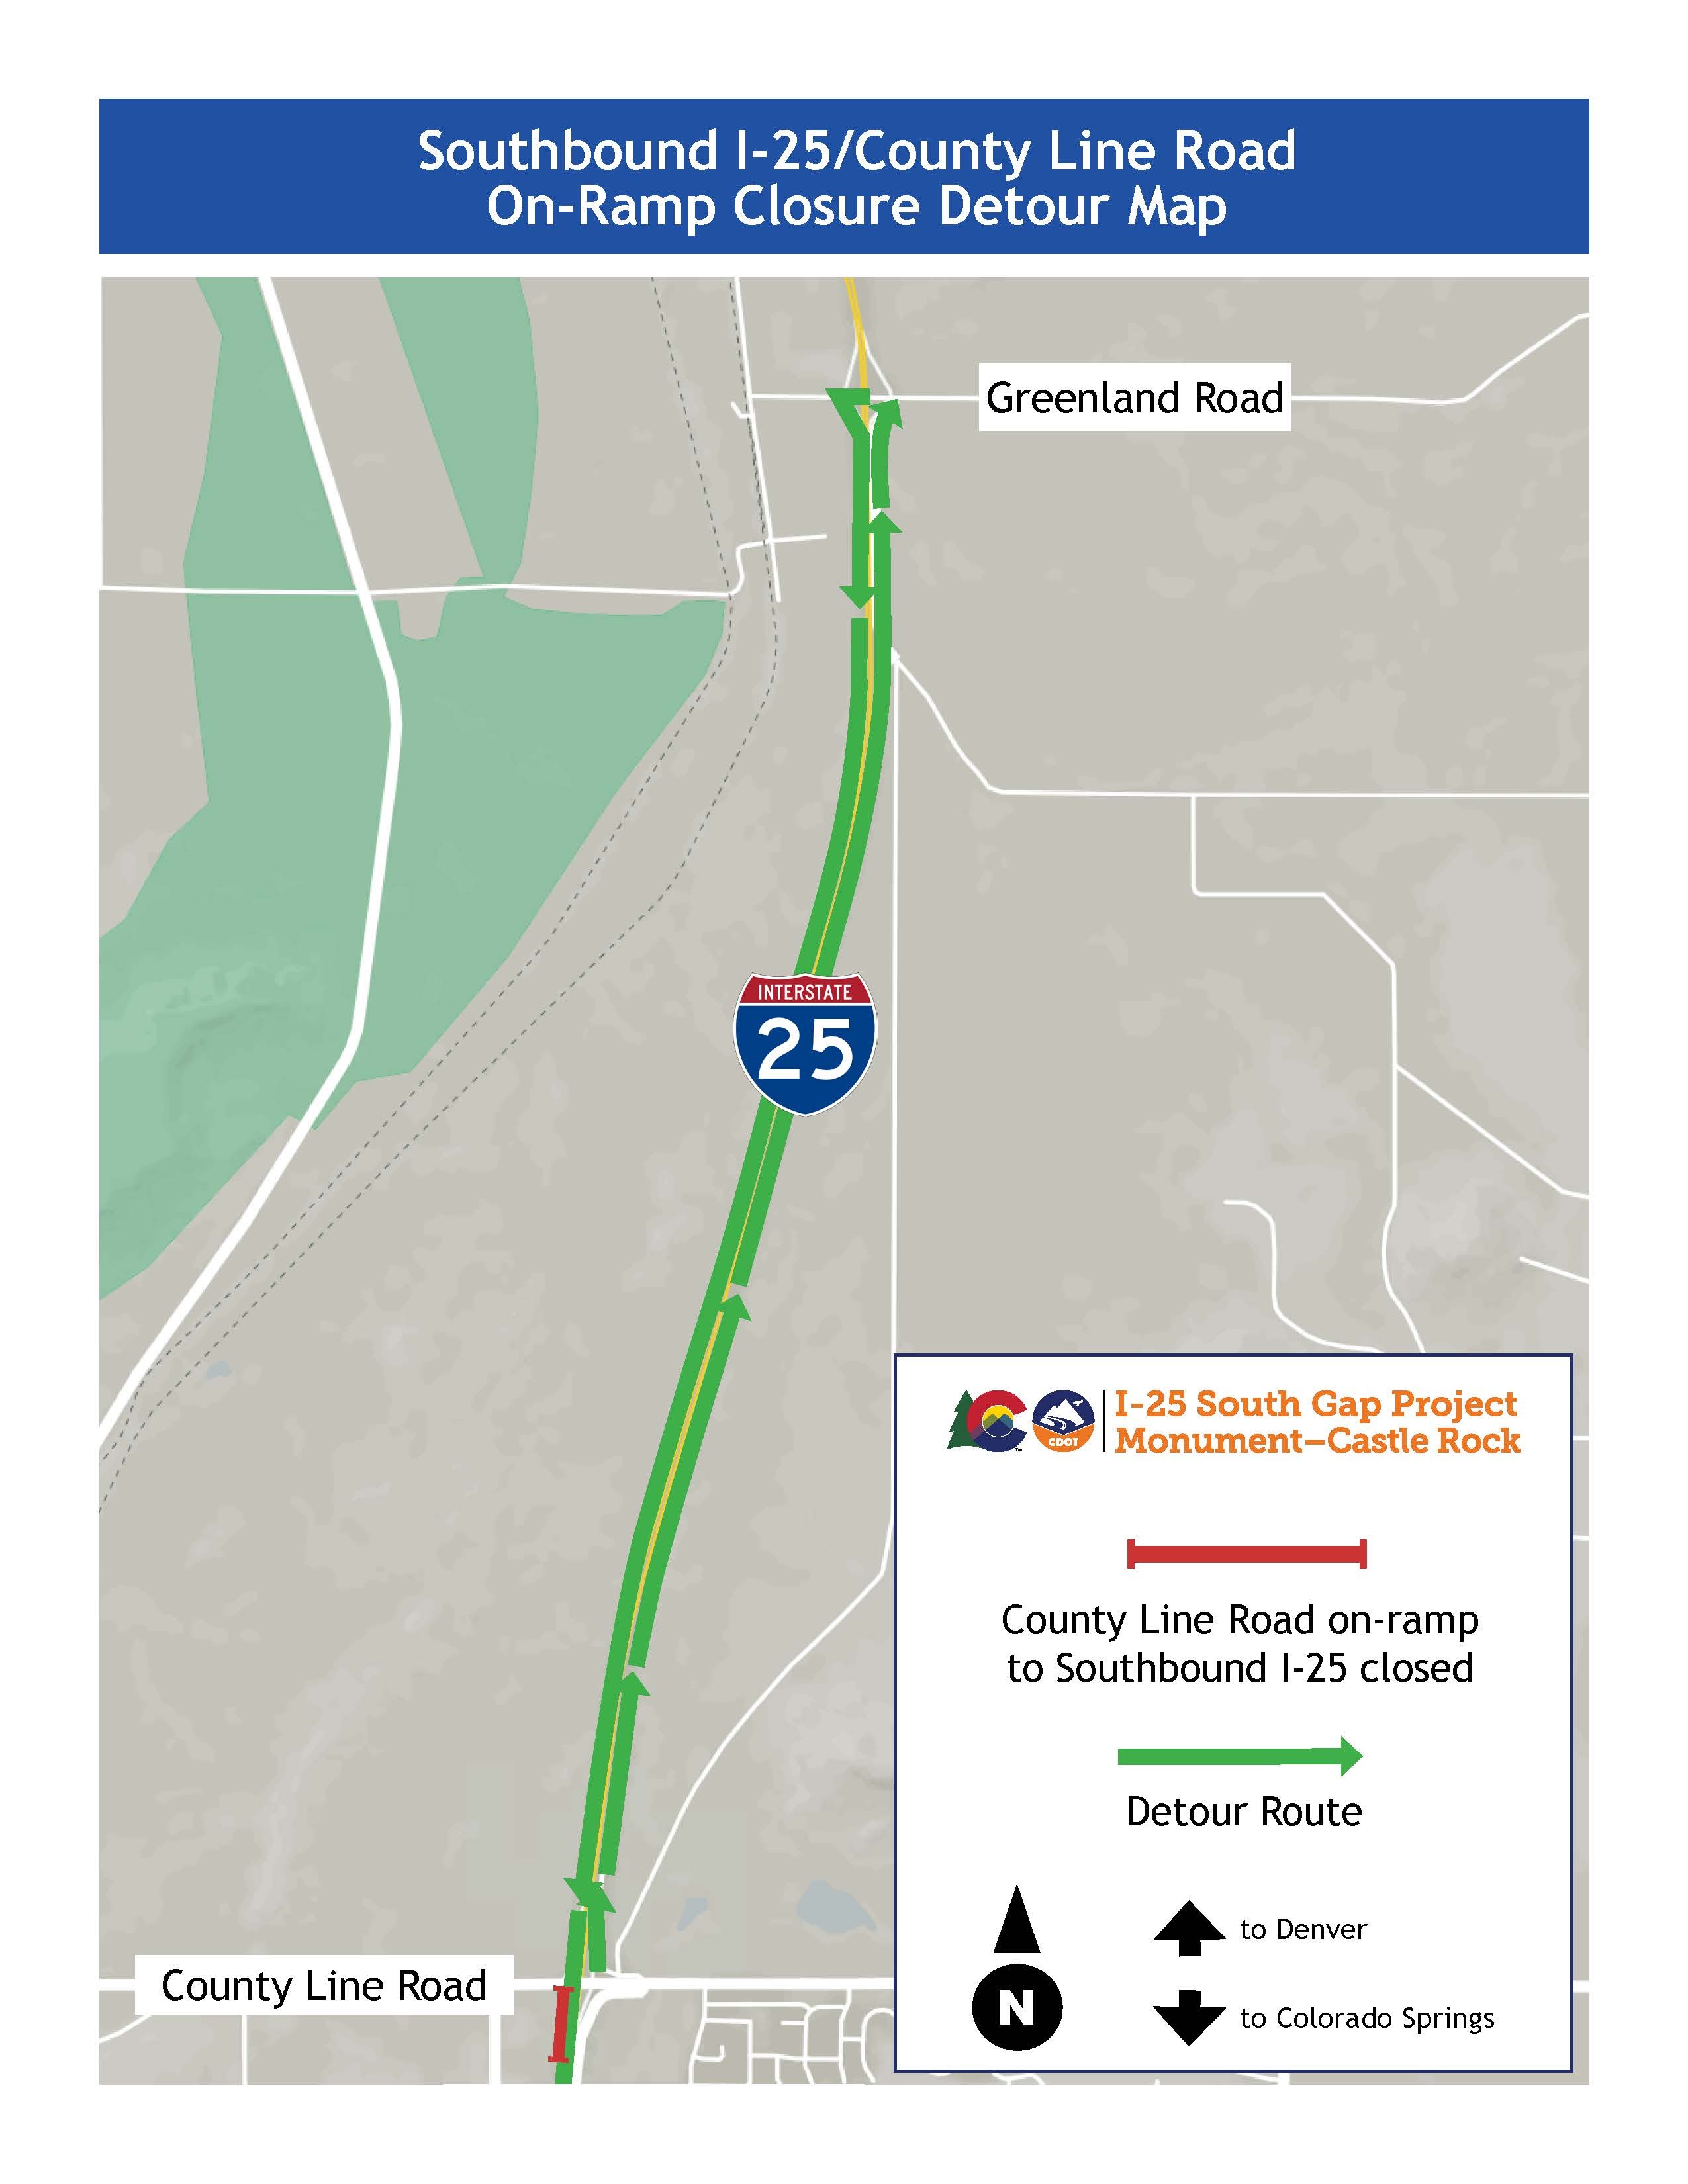 Southbound I-25/County Line Road Off-Ramp Closure Detour Map at Greenland Road detail image